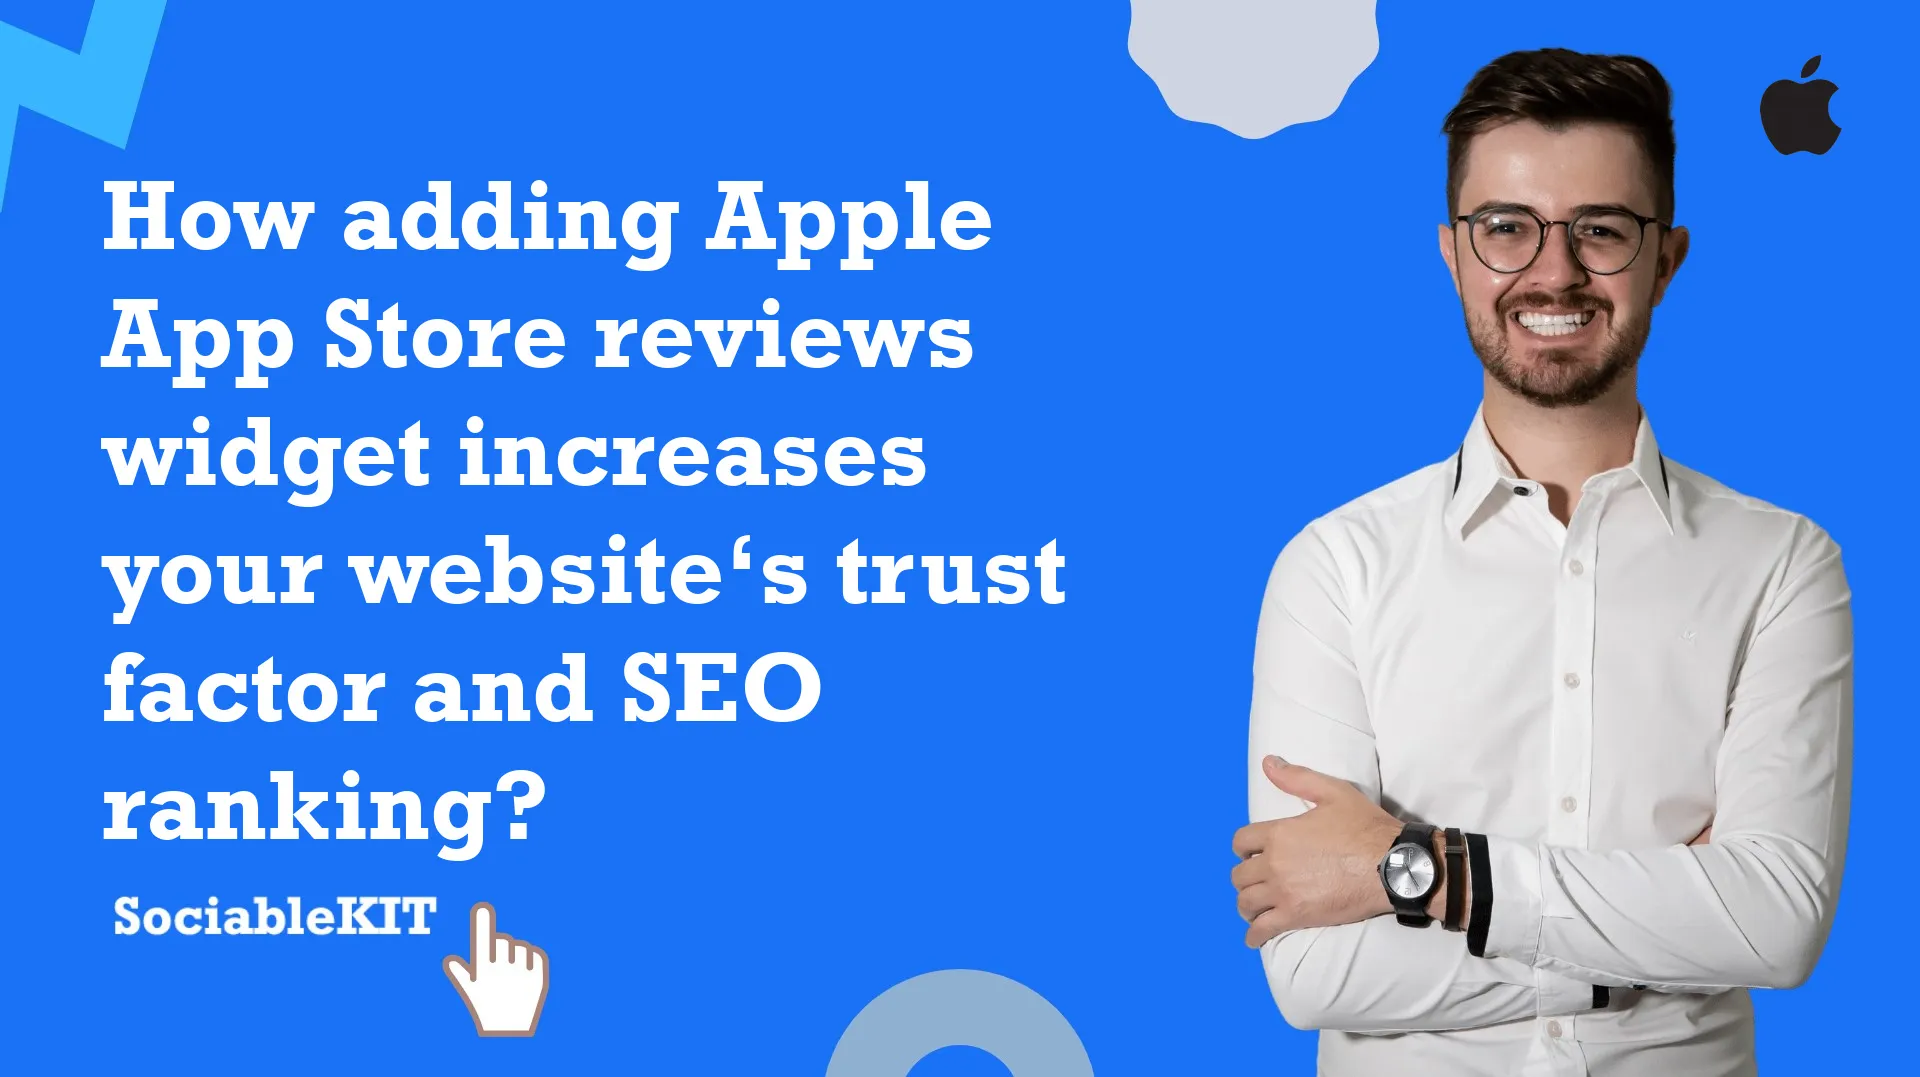 How does adding an Apple App Store reviews widget increase your website’s trust factor and SEO ranking?